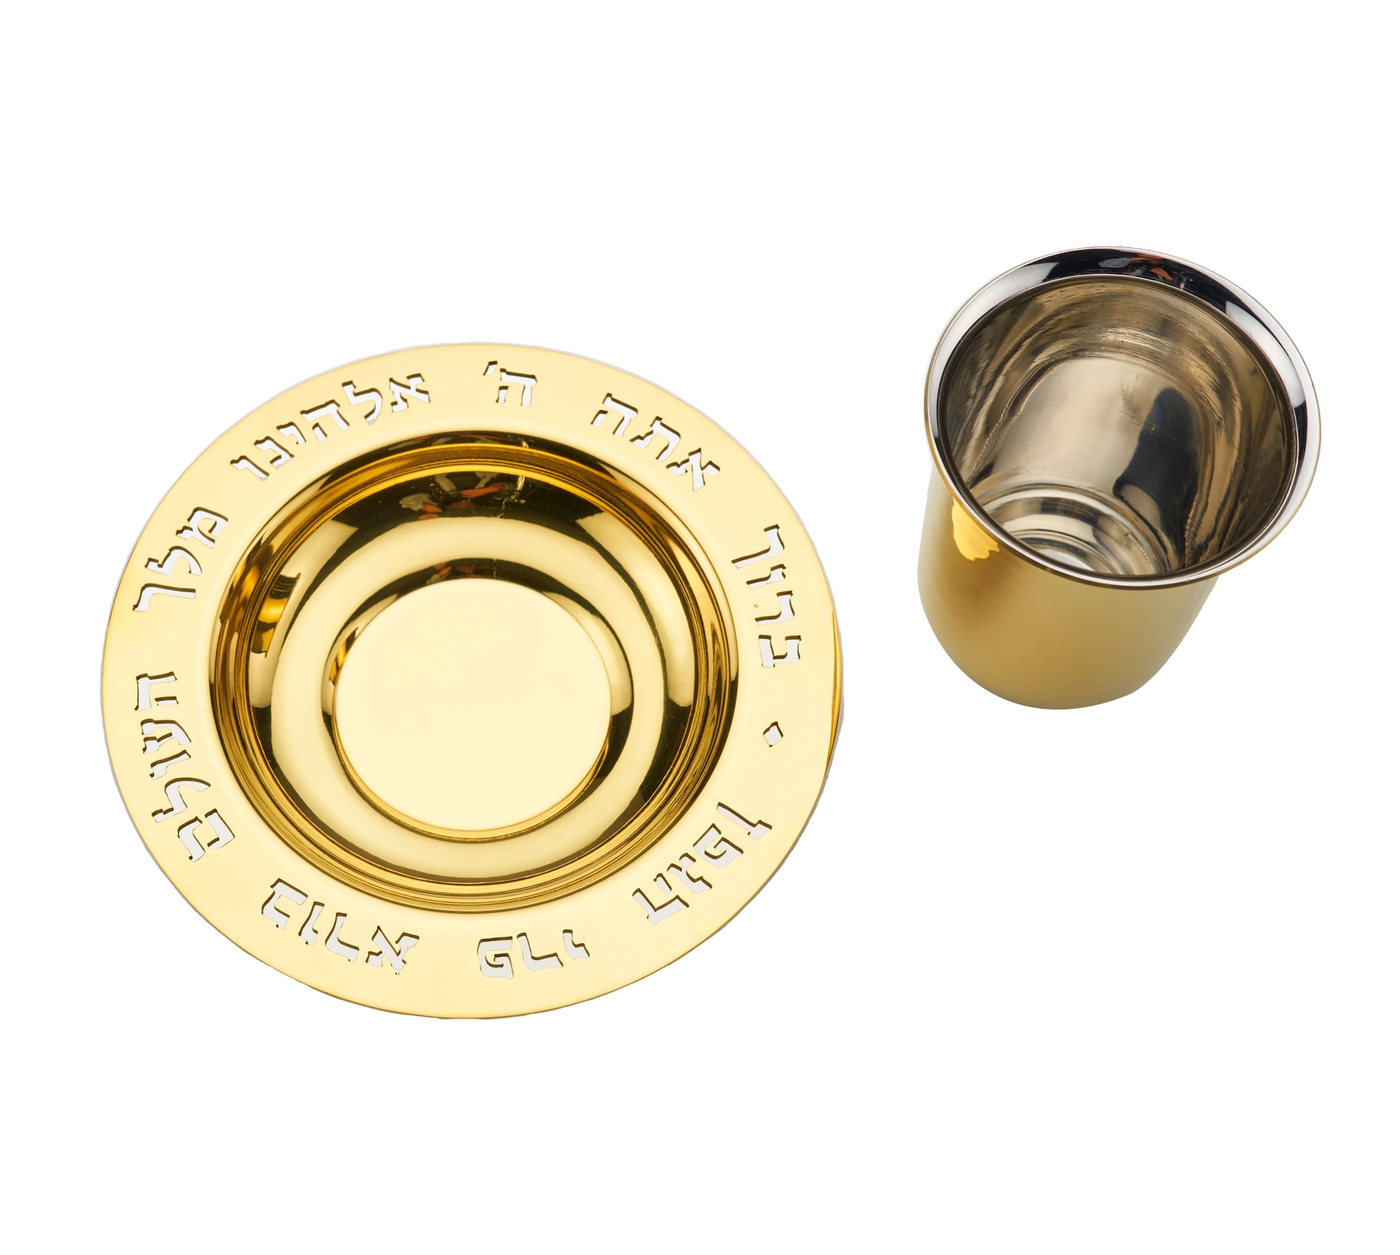 Gold Reserve Kiddush Cup (1 Count)